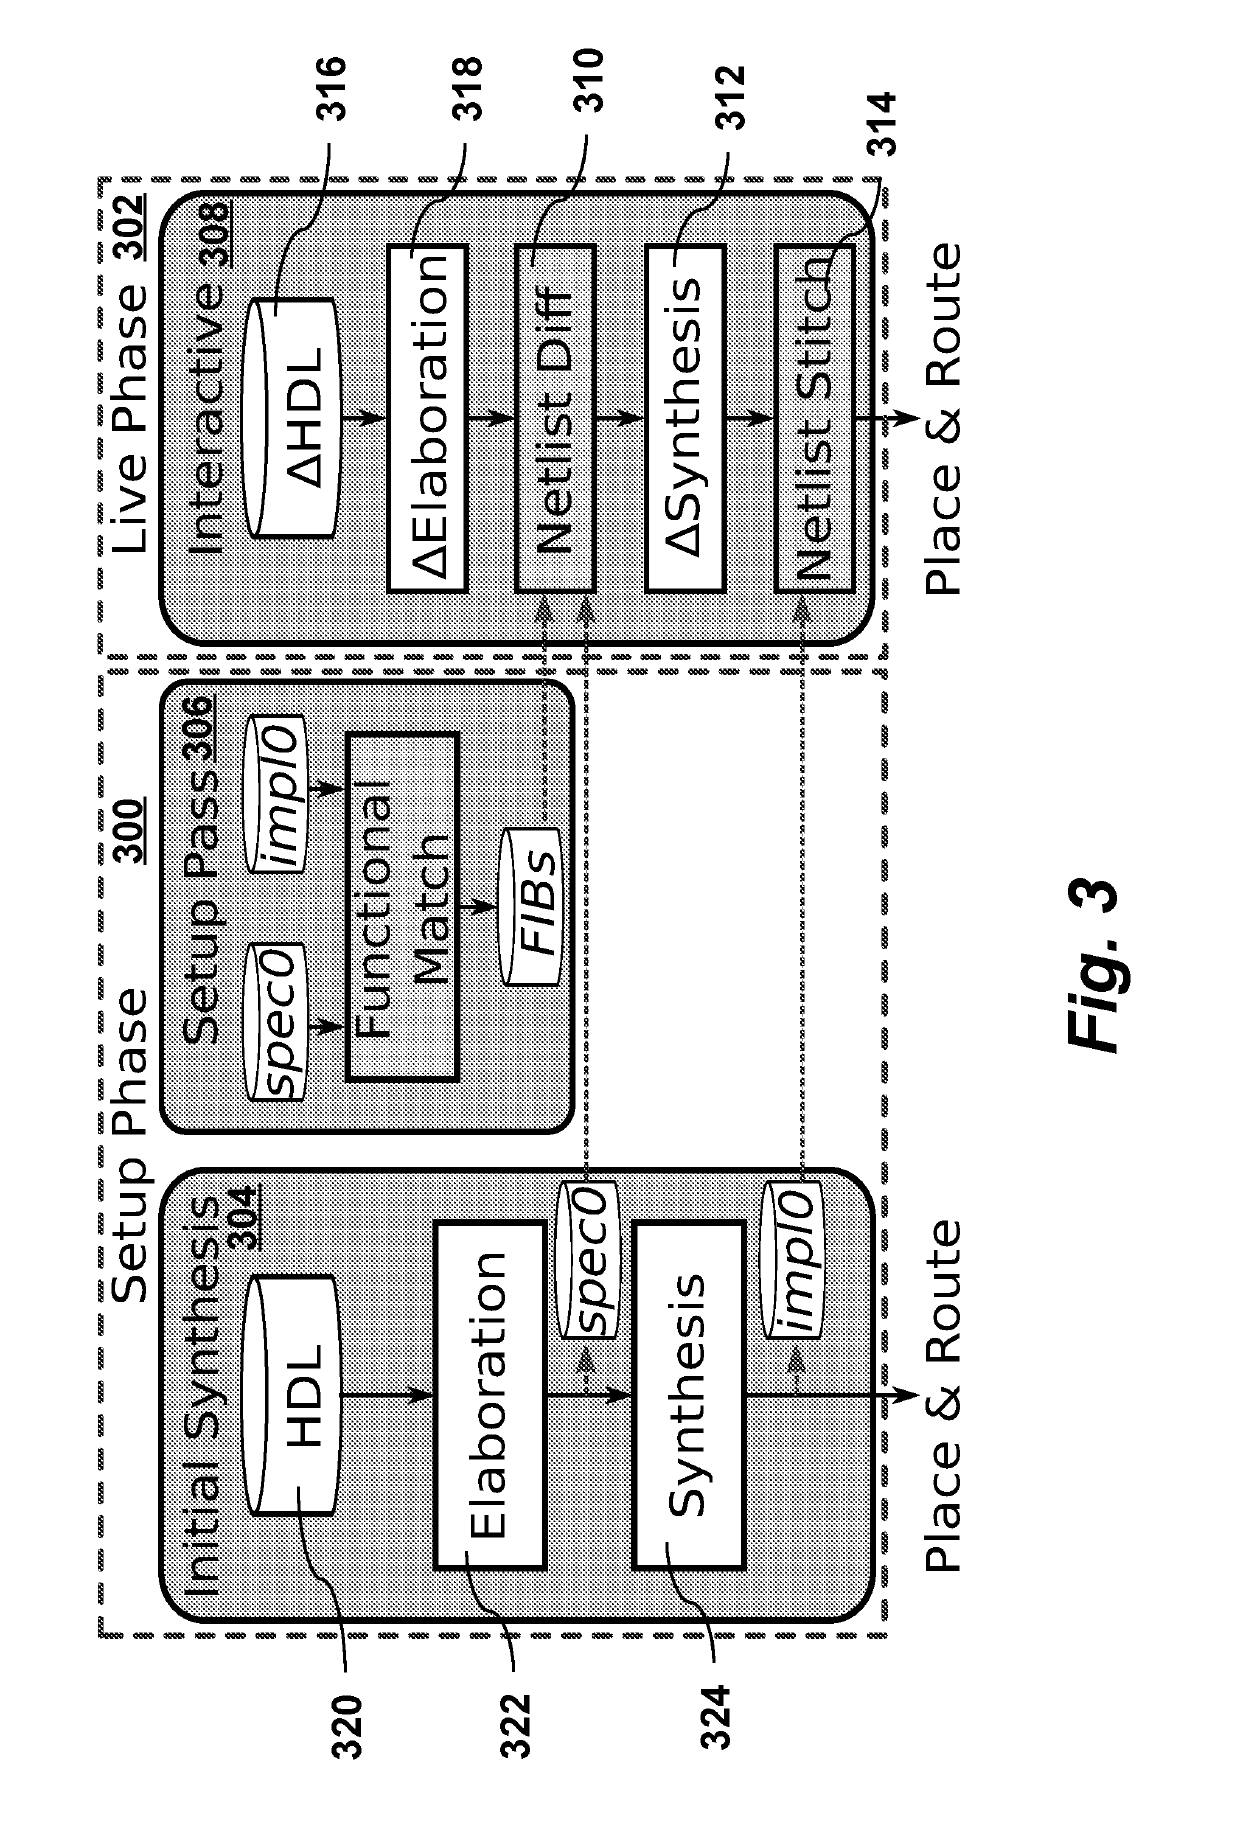 Interactive Incremental Synthesis Flow for Integrated Circuit Design